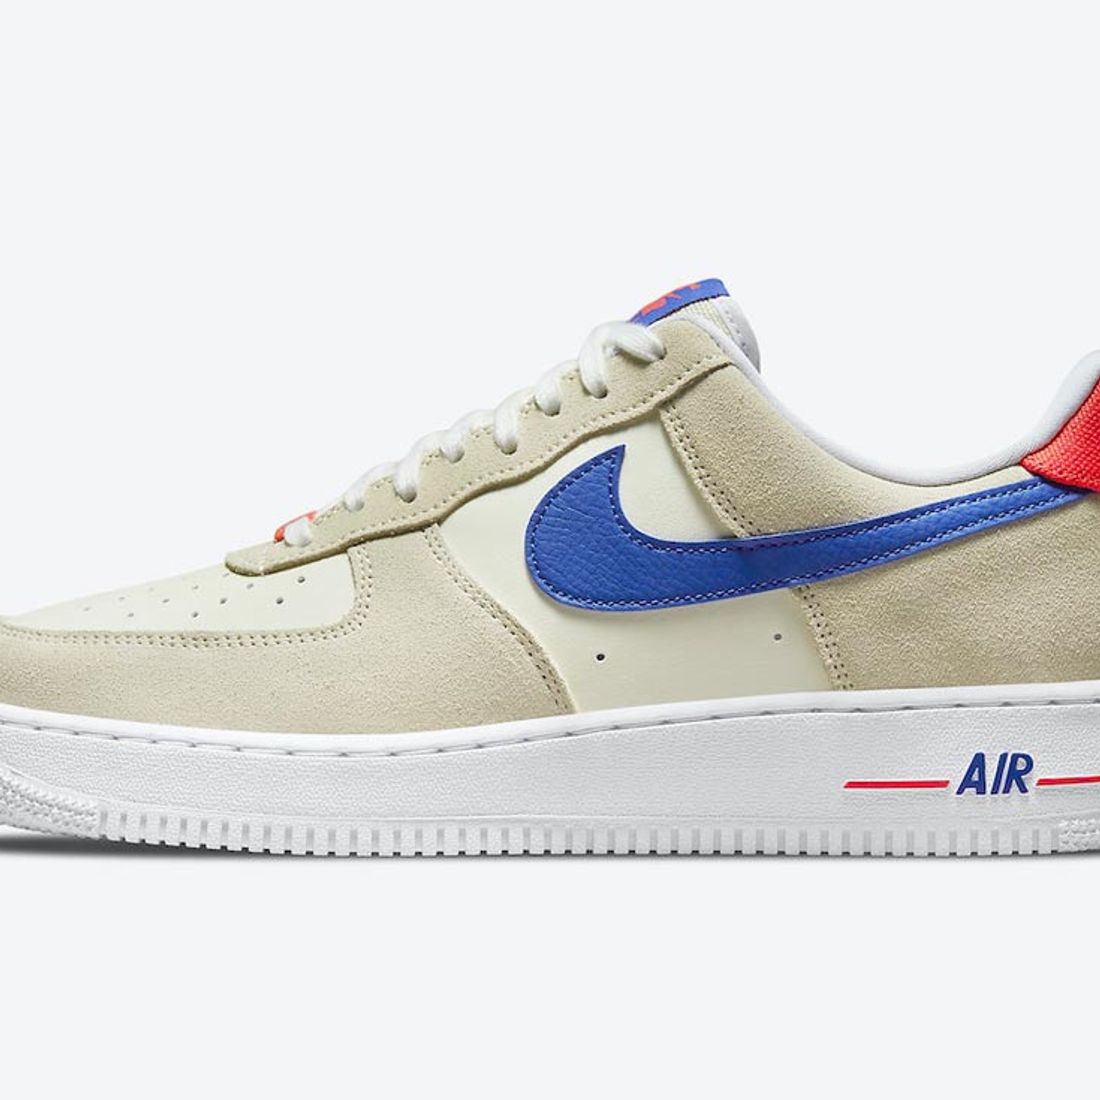 The Nike Air Force 1 Goes Red, White and Blue - Sneaker Freaker